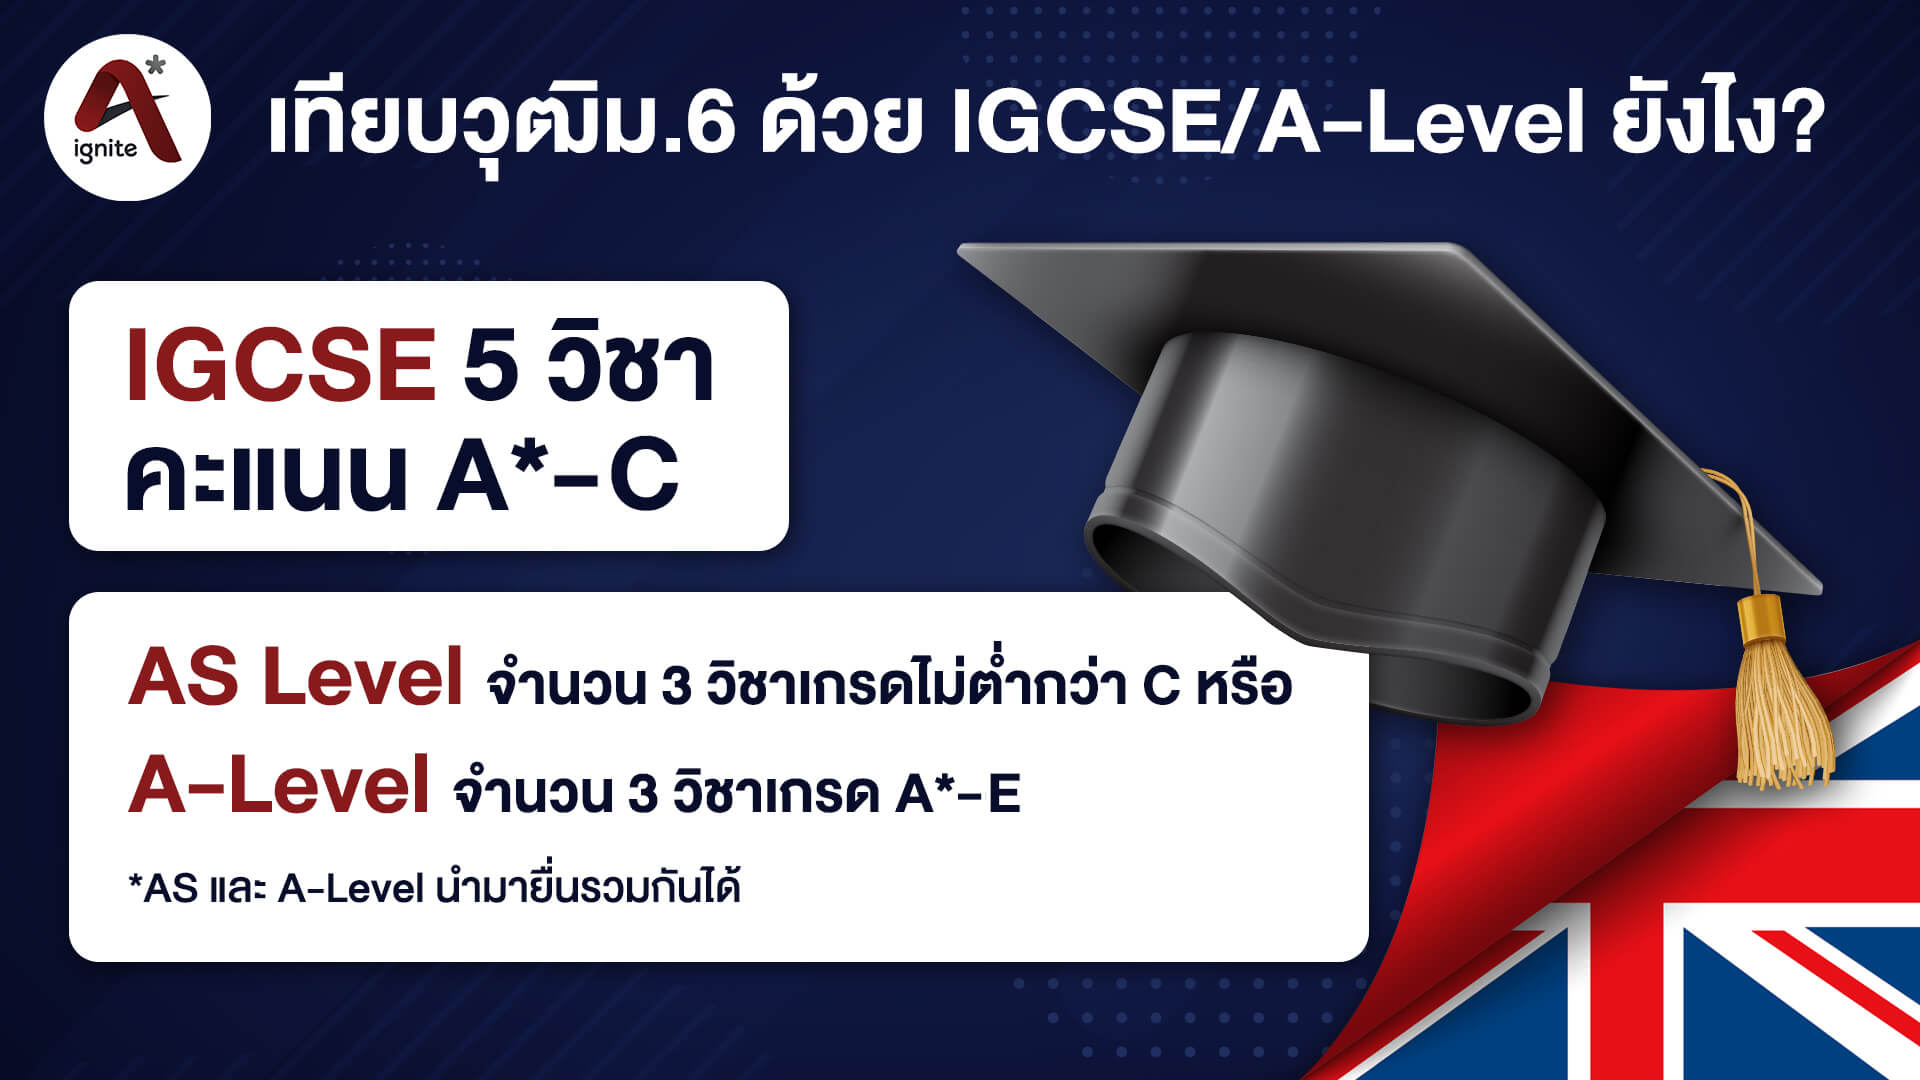 IGCSE and A-level for grade 13 students.